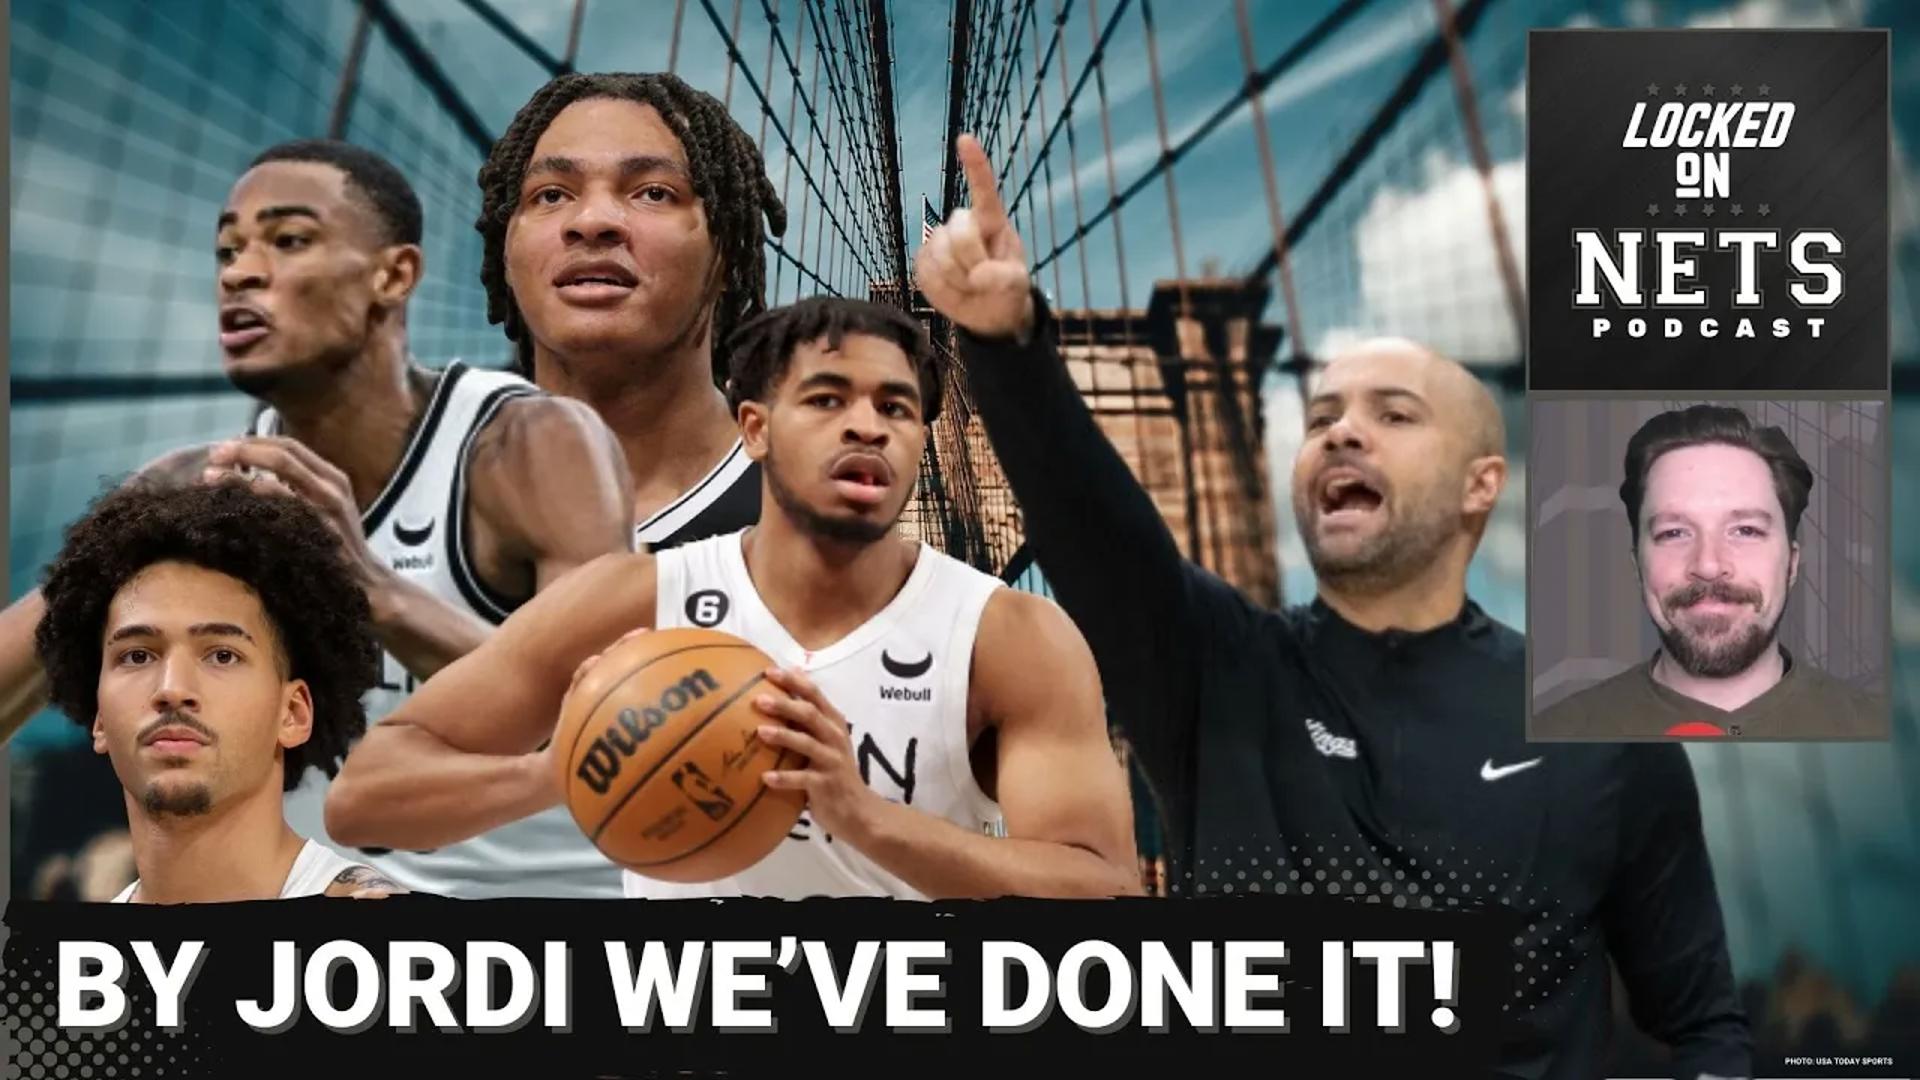 Jordi Fernandez was officially introduced as the Nets Head Coach and gave a glimpse into what the future holds for Brooklyn.